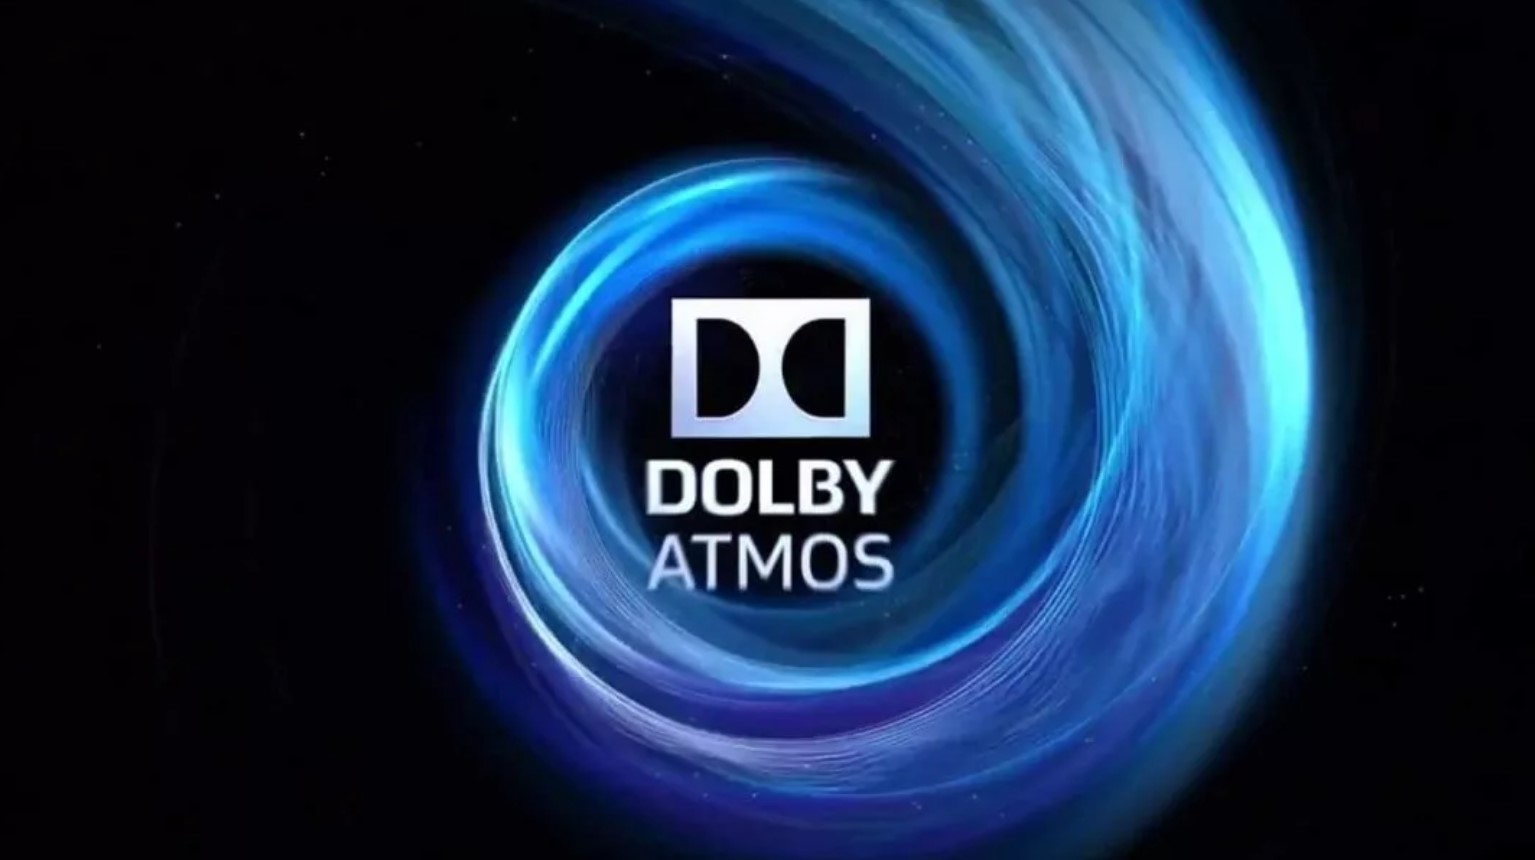 How To Activate Dolby Atmos Or Spatial Sound In Windows 10